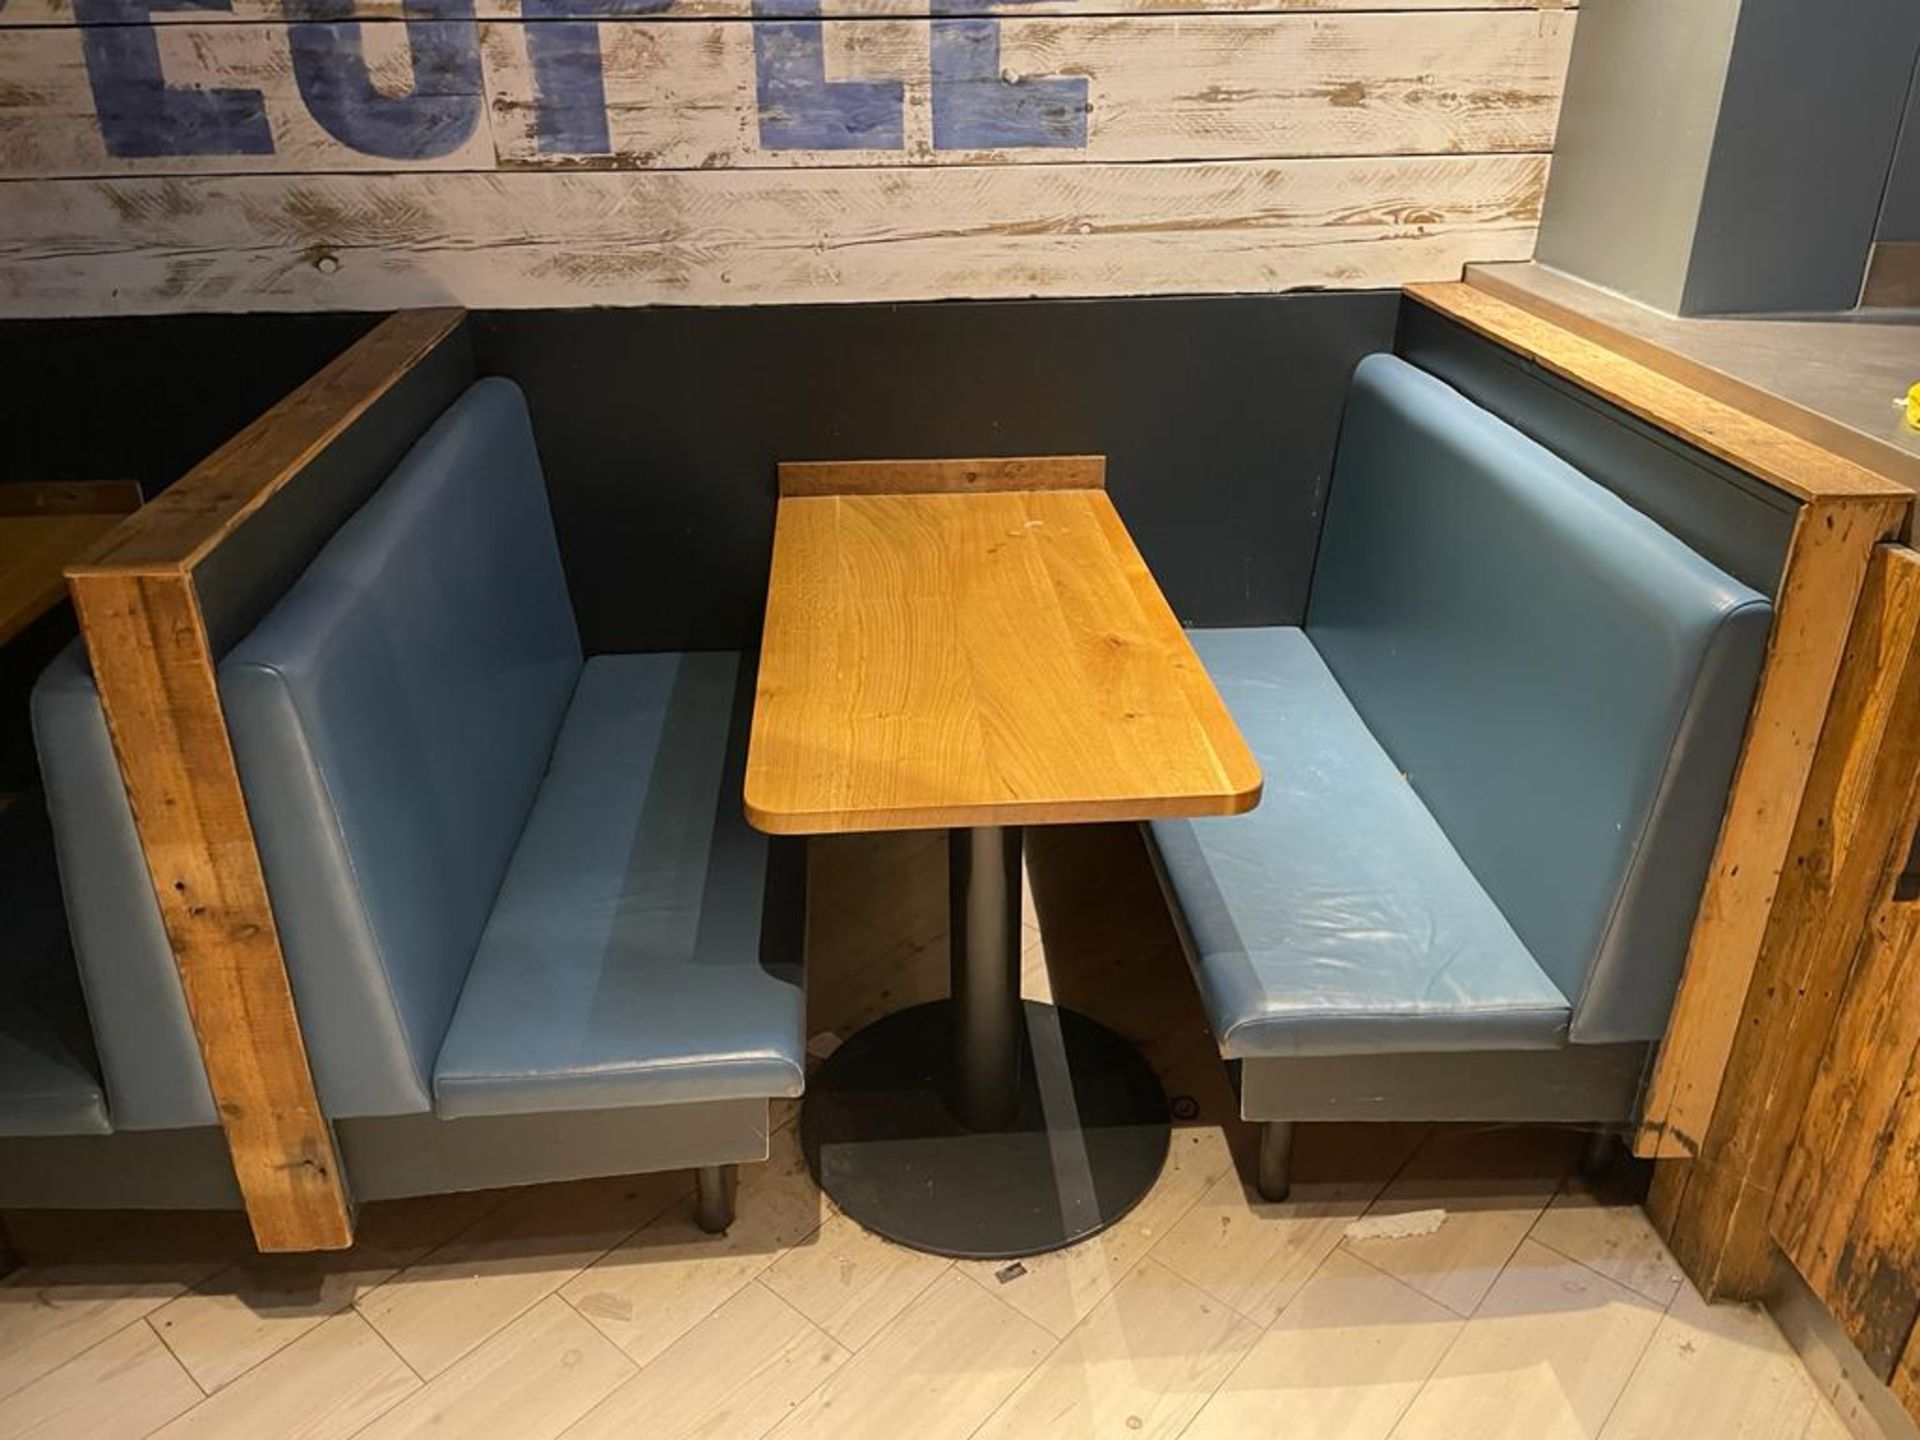 3 x Restaurant Leather Seating Booths With Oak Tables - Includes 6 x Seating Benches Upholstered - Image 11 of 11